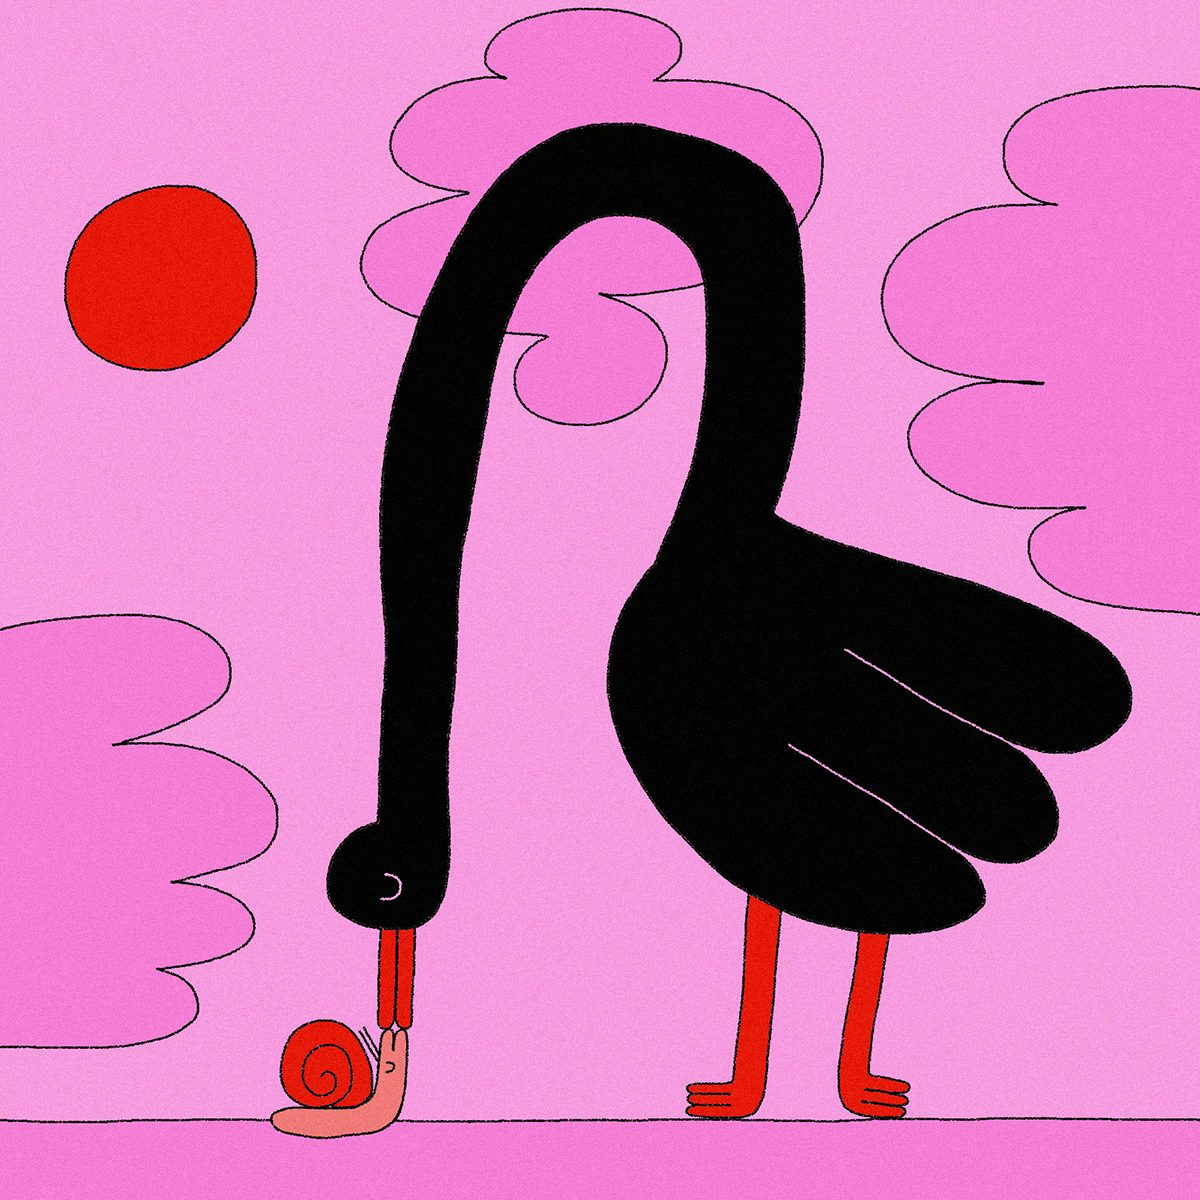 Illustration of a bird bending over to kiss a snail on the ground by Aysha Tengiz